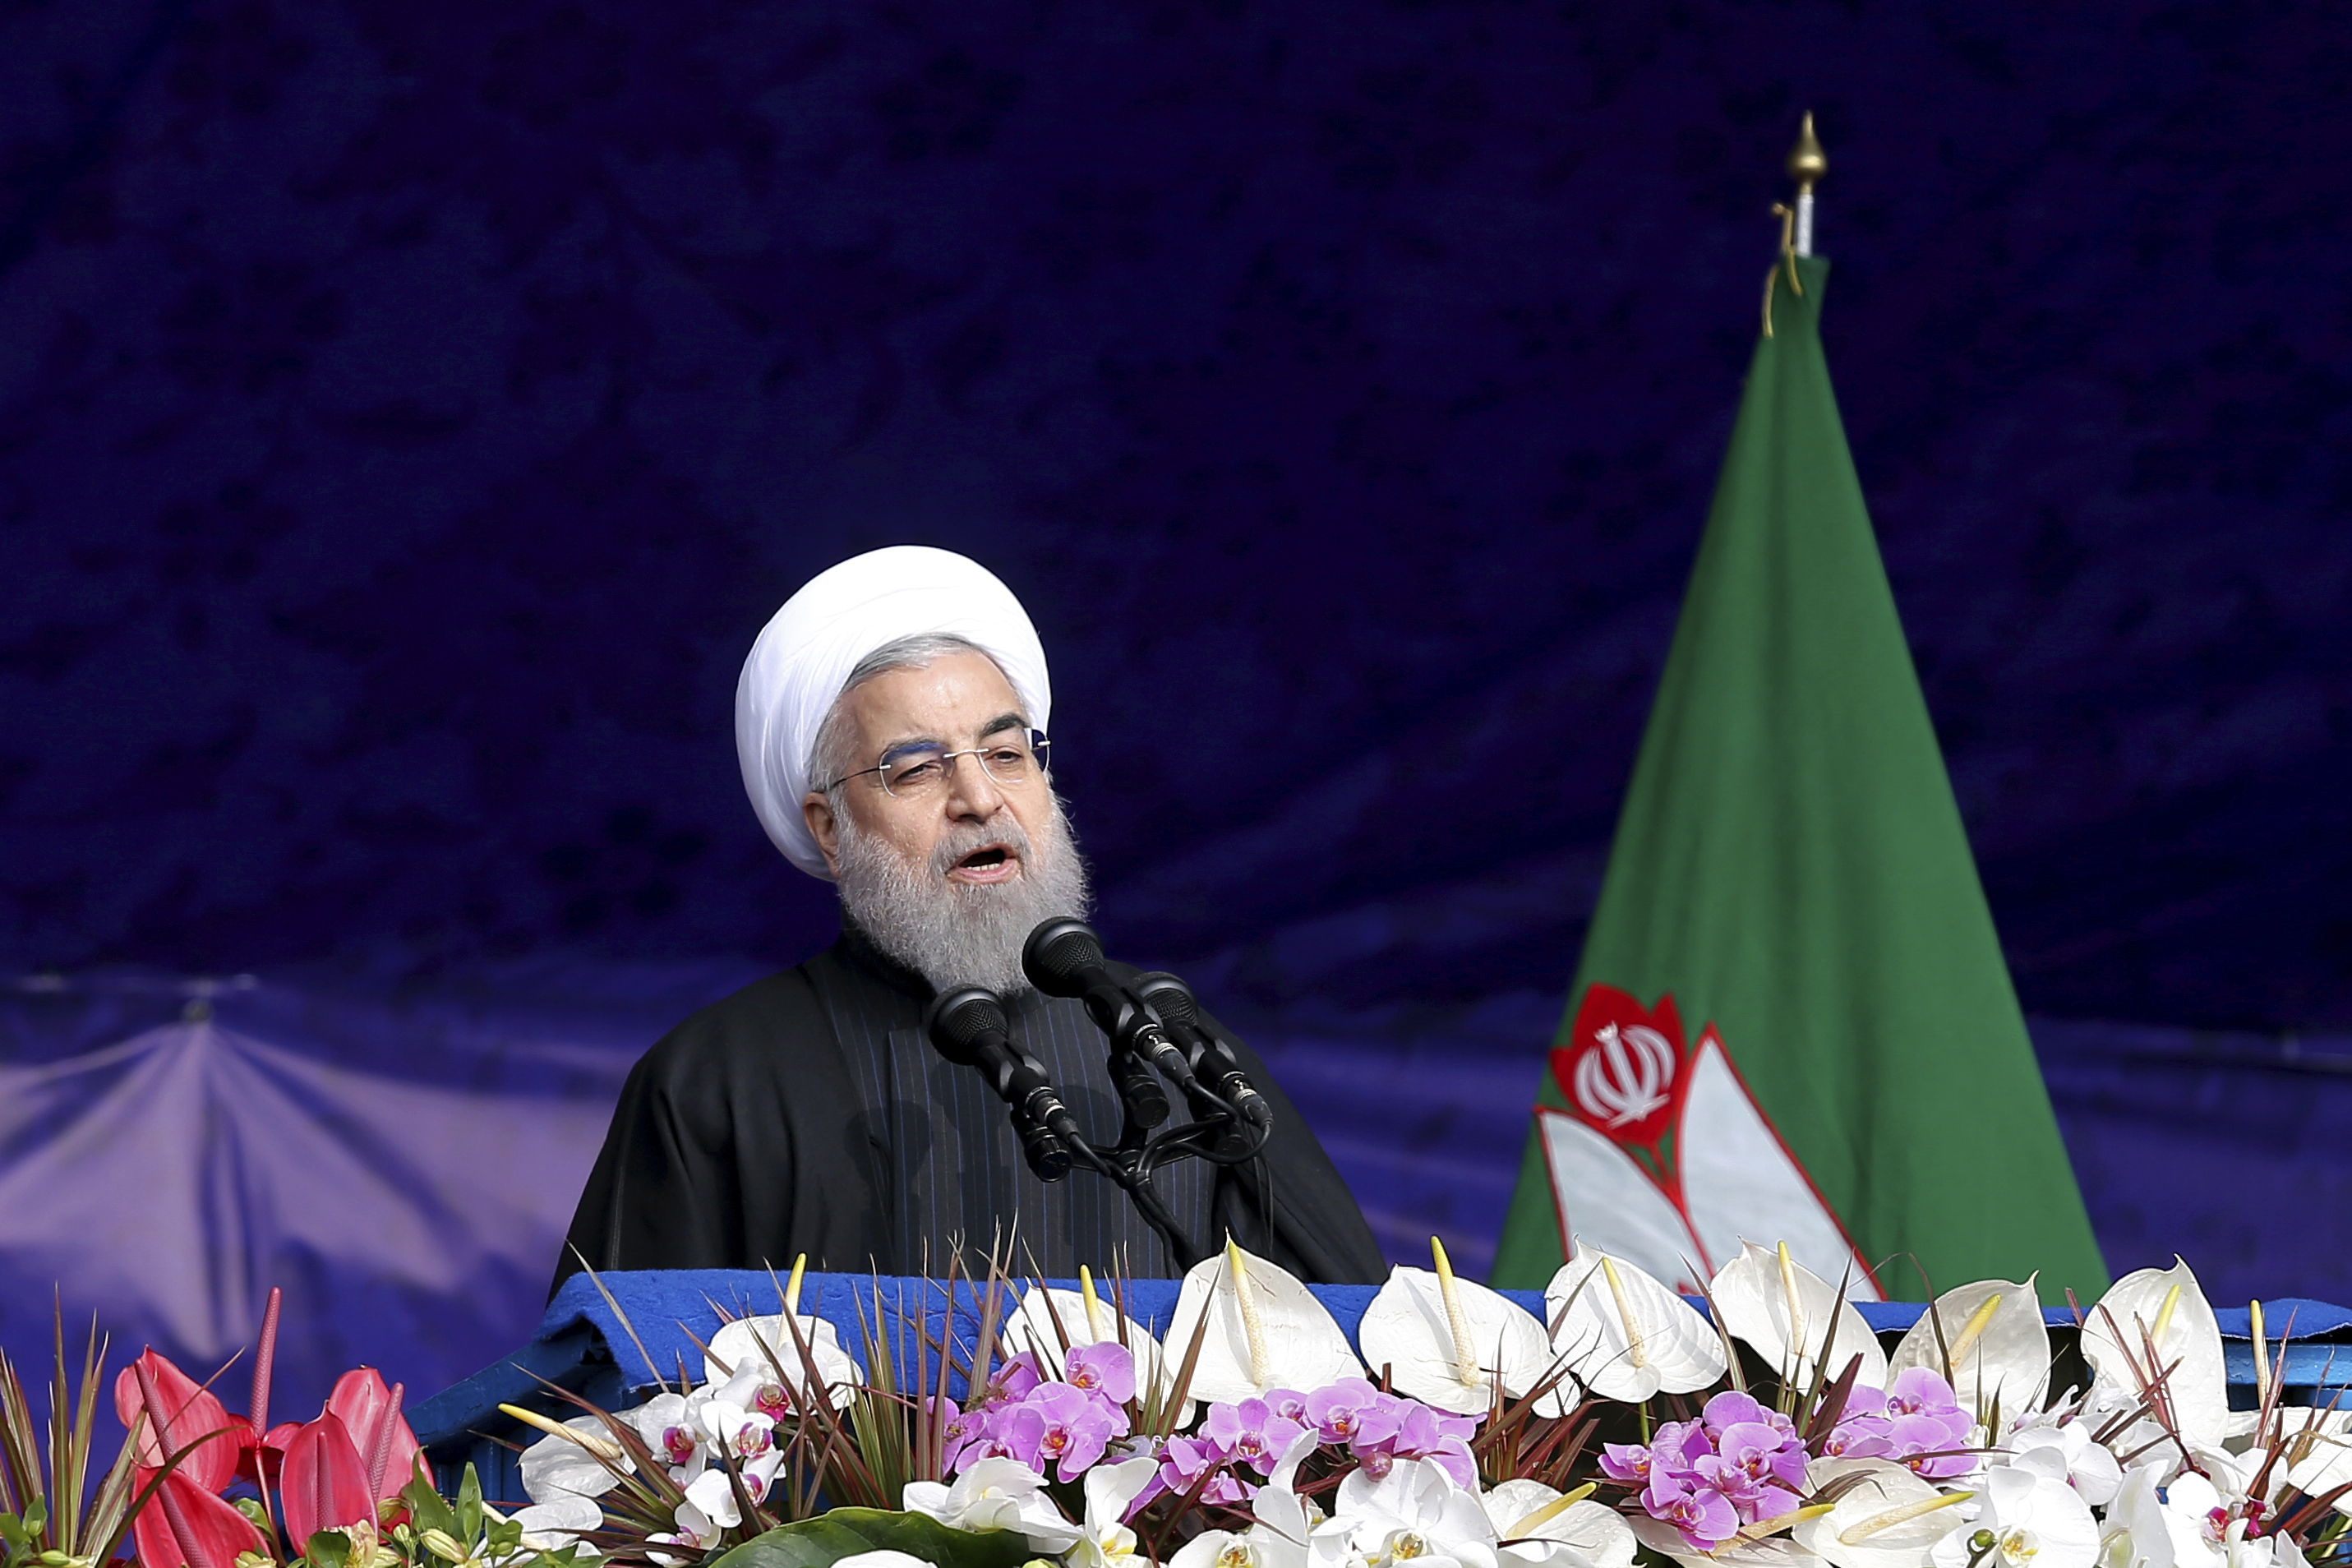 Iranian President Hassan Rouhani, delivers a speech during an annual rally commemorating the anniversary of the 1979 Islamic revolution, which toppled the late pro-U.S. Shah, Mohammad Reza Pahlavi, in Tehran, Iran, Friday, Feb. 10, 2017. (AP Photo/Ebrahim Noroozi)